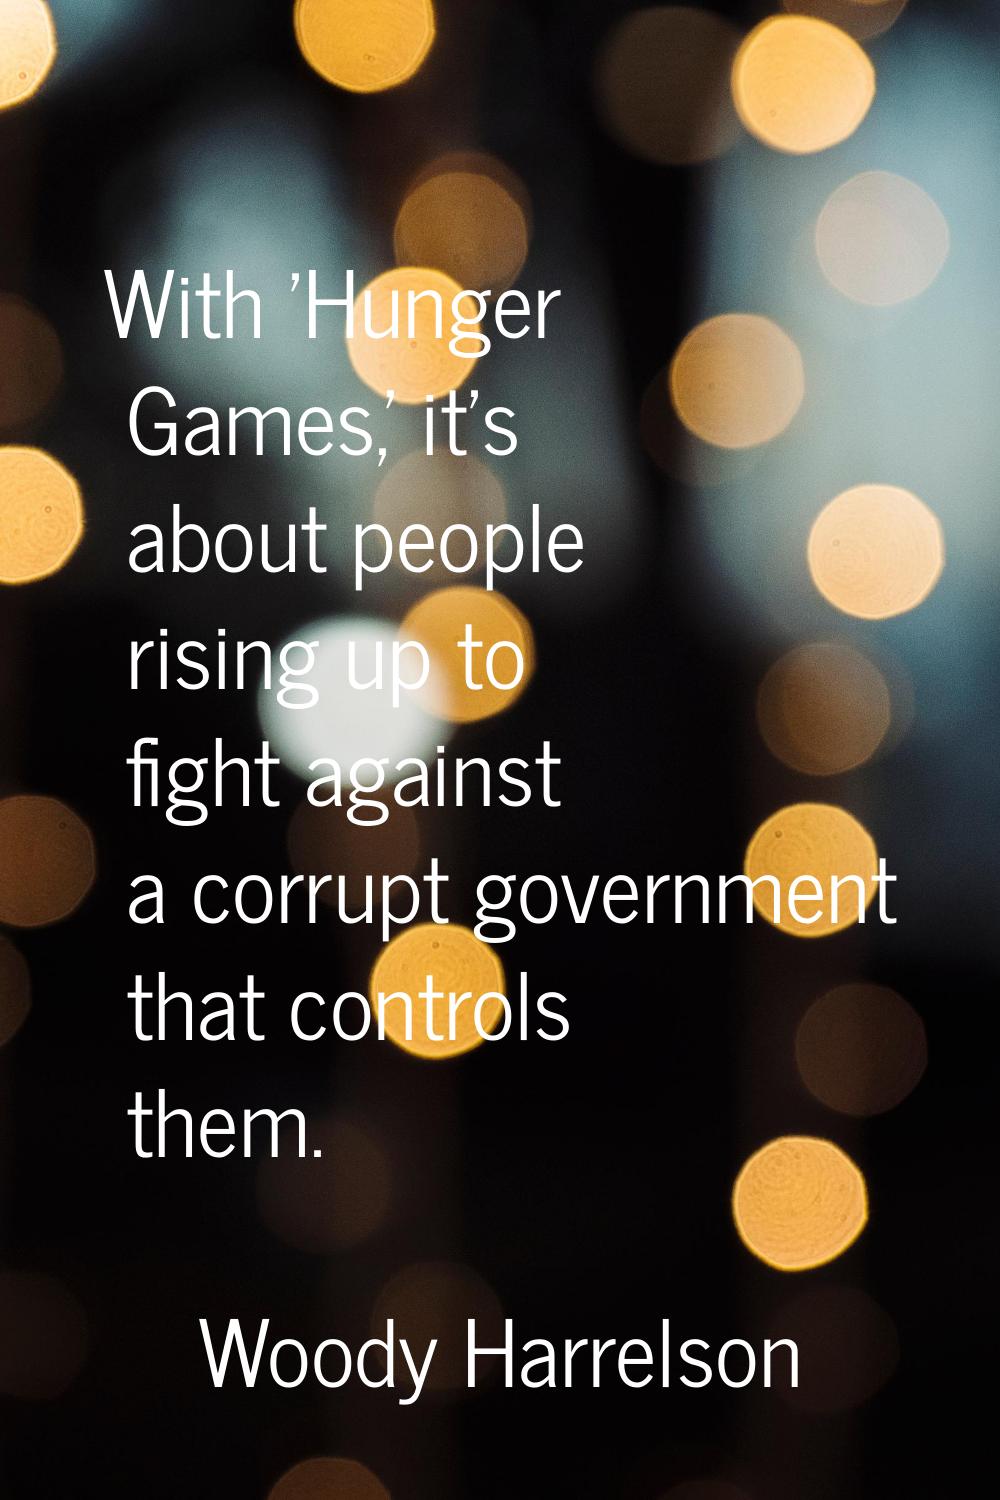 With 'Hunger Games,' it's about people rising up to fight against a corrupt government that control